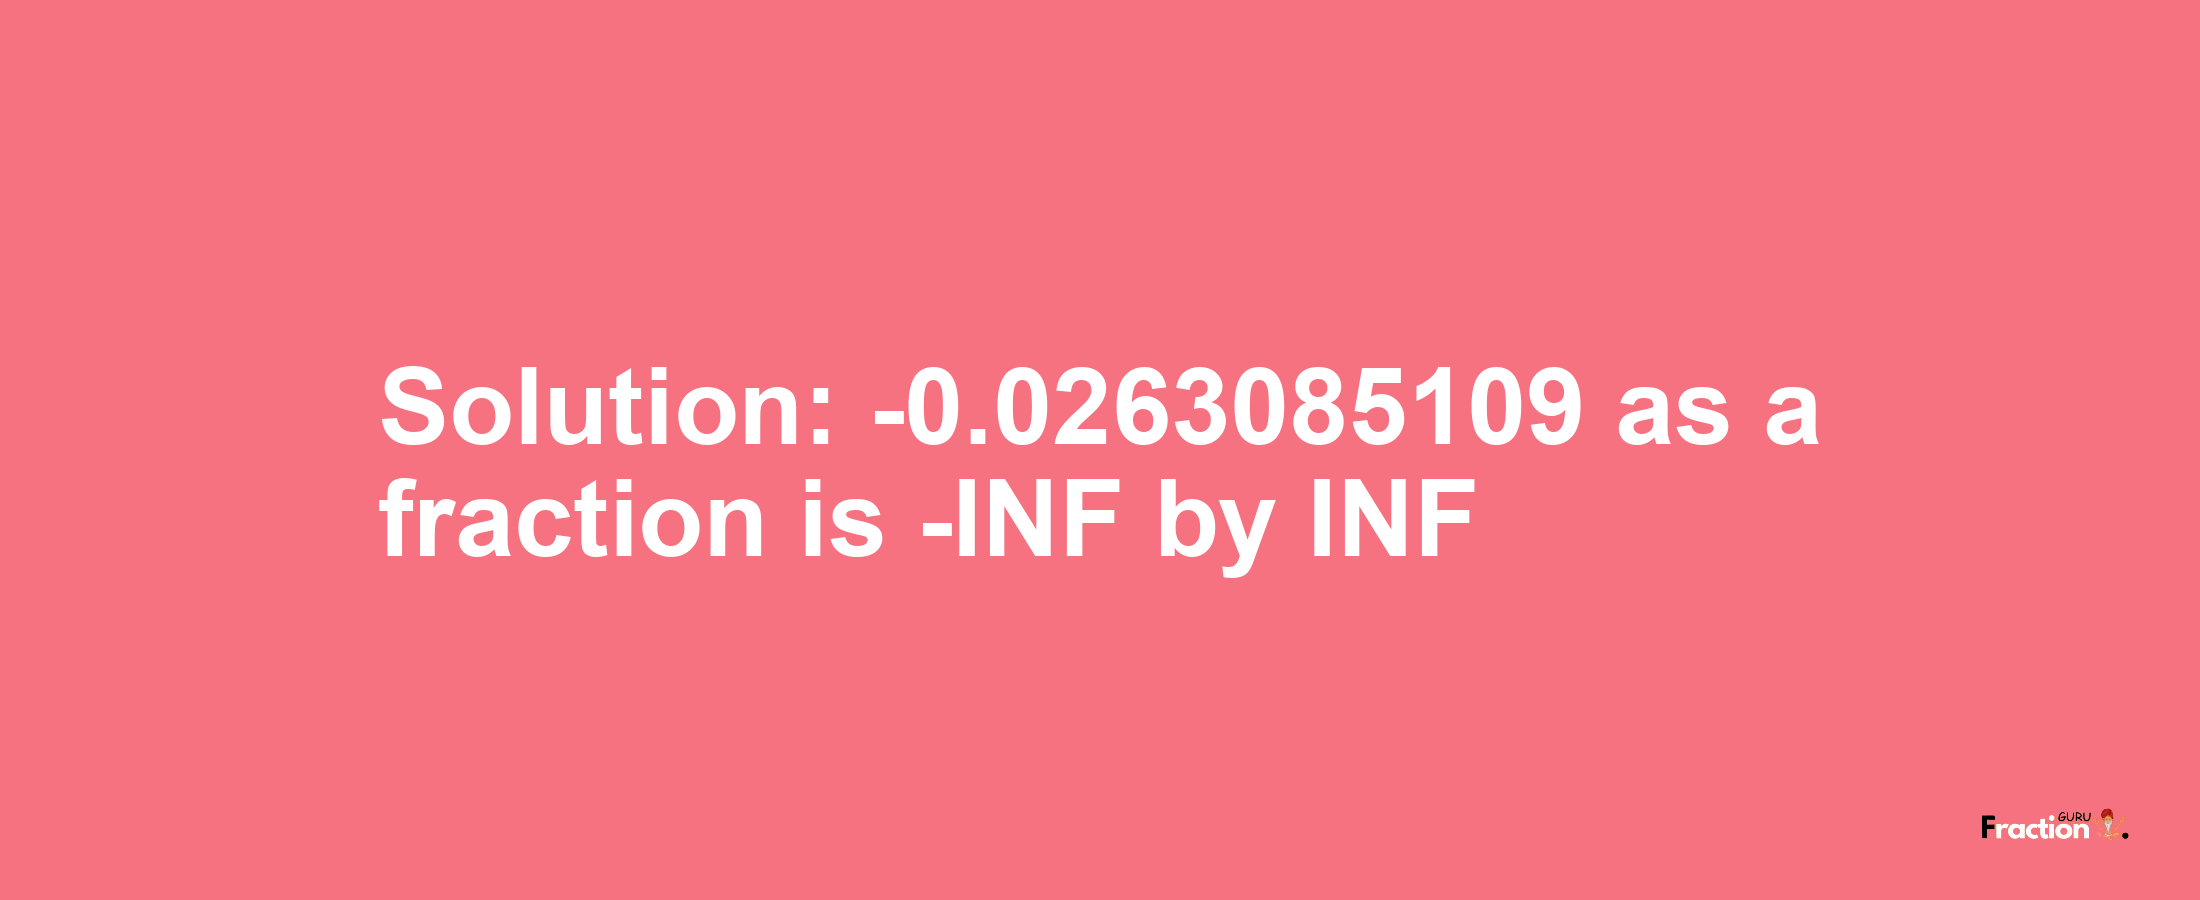 Solution:-0.0263085109 as a fraction is -INF/INF